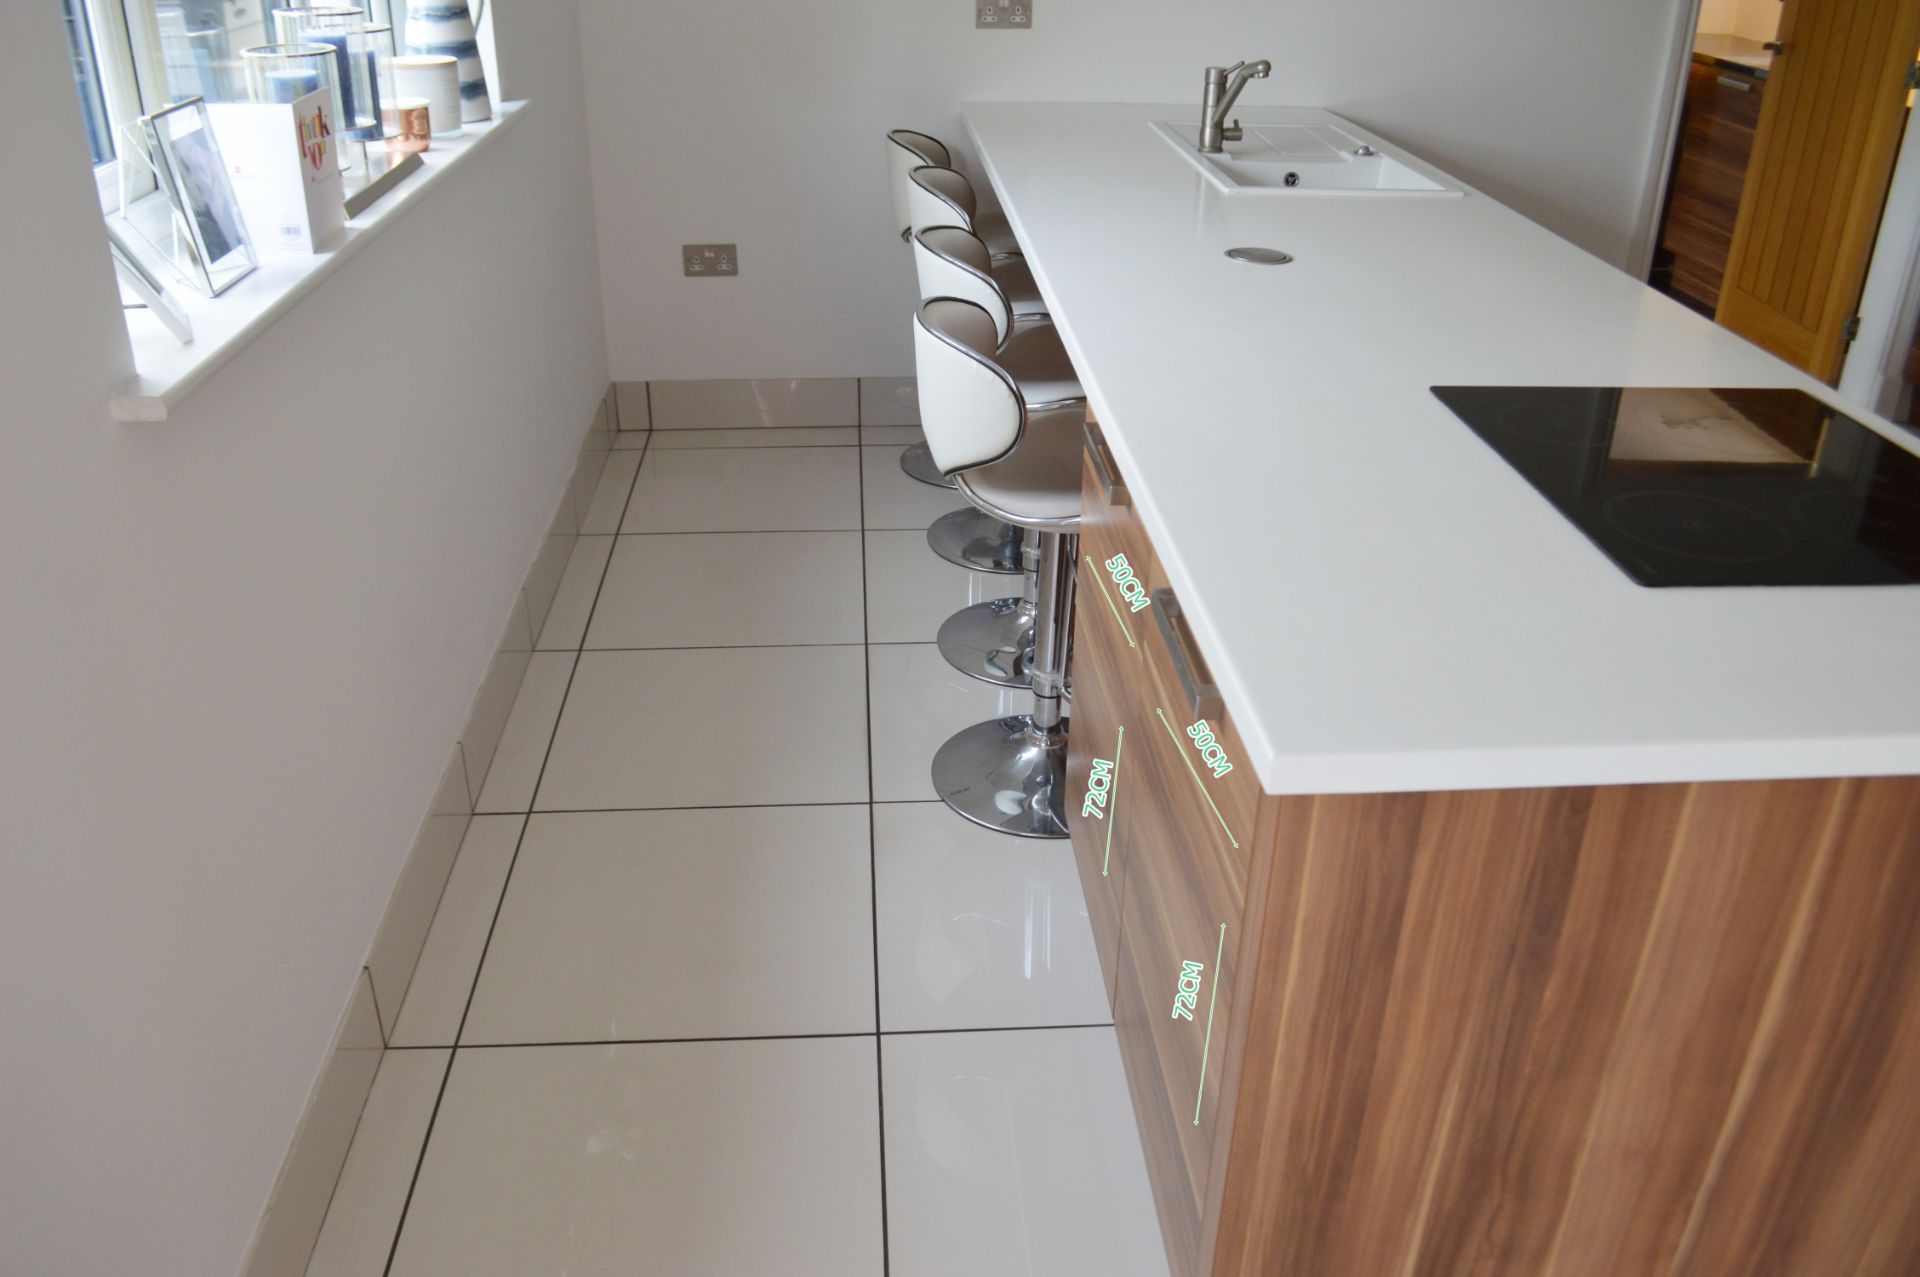 1 x Contemporary Bespoke Fitted Kitchen With Integrated Neff  Branded Appliances, Quartz Worktops - Image 15 of 52